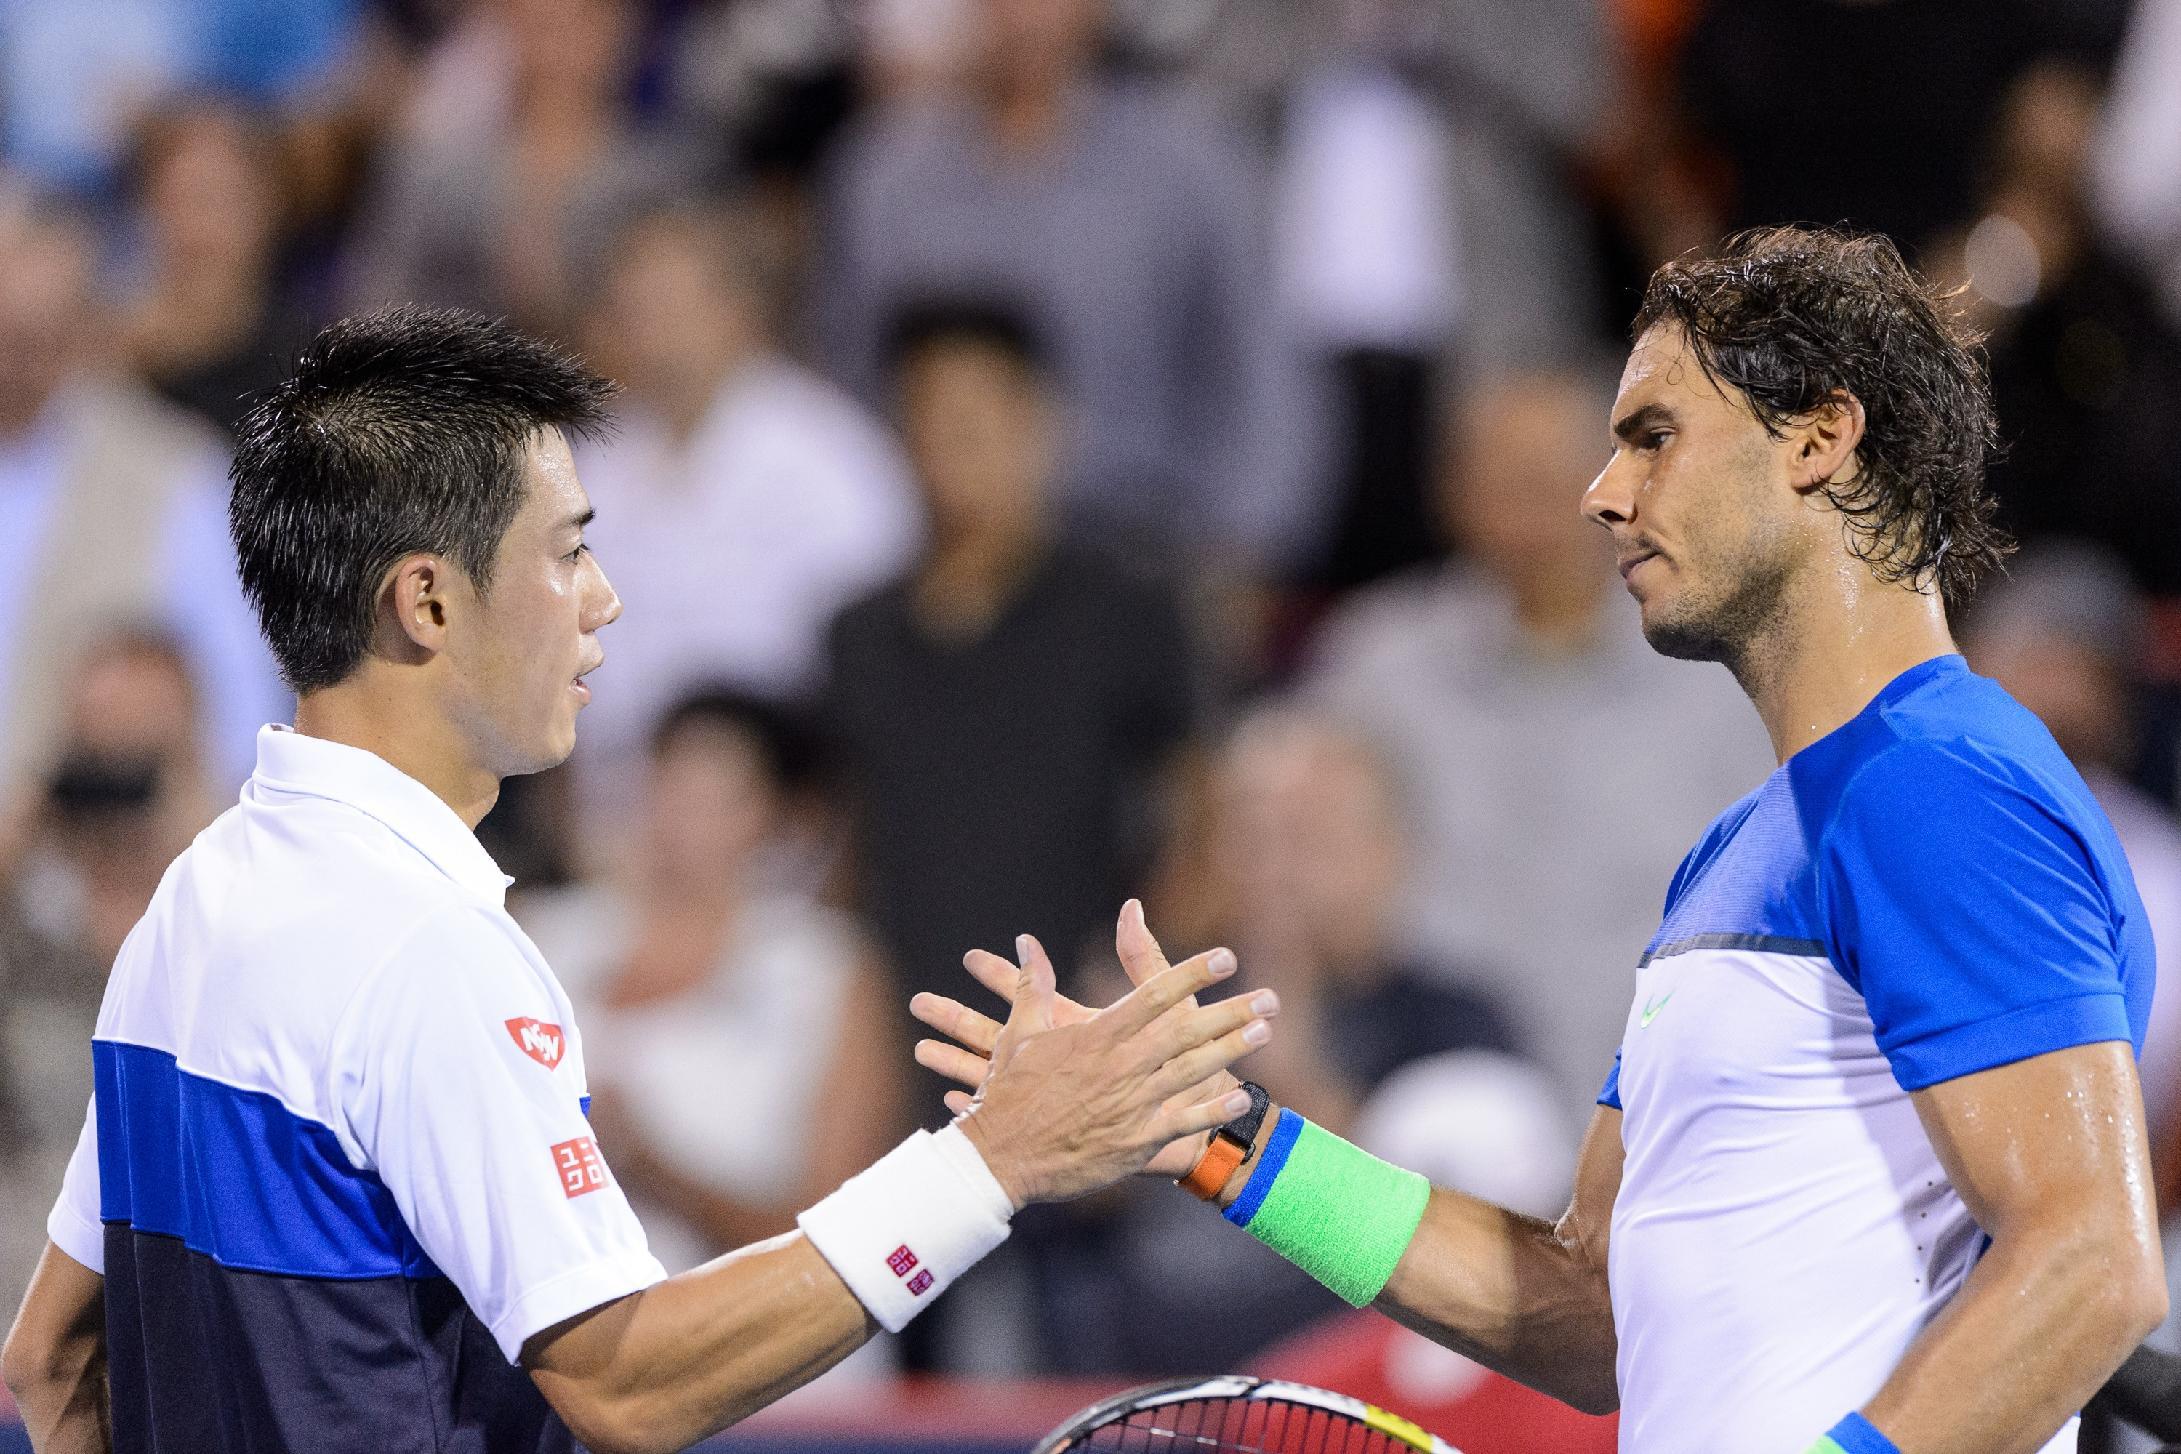 nadal-shakes-hands-with-nishikori-in-montreal-rogers-cup-2015